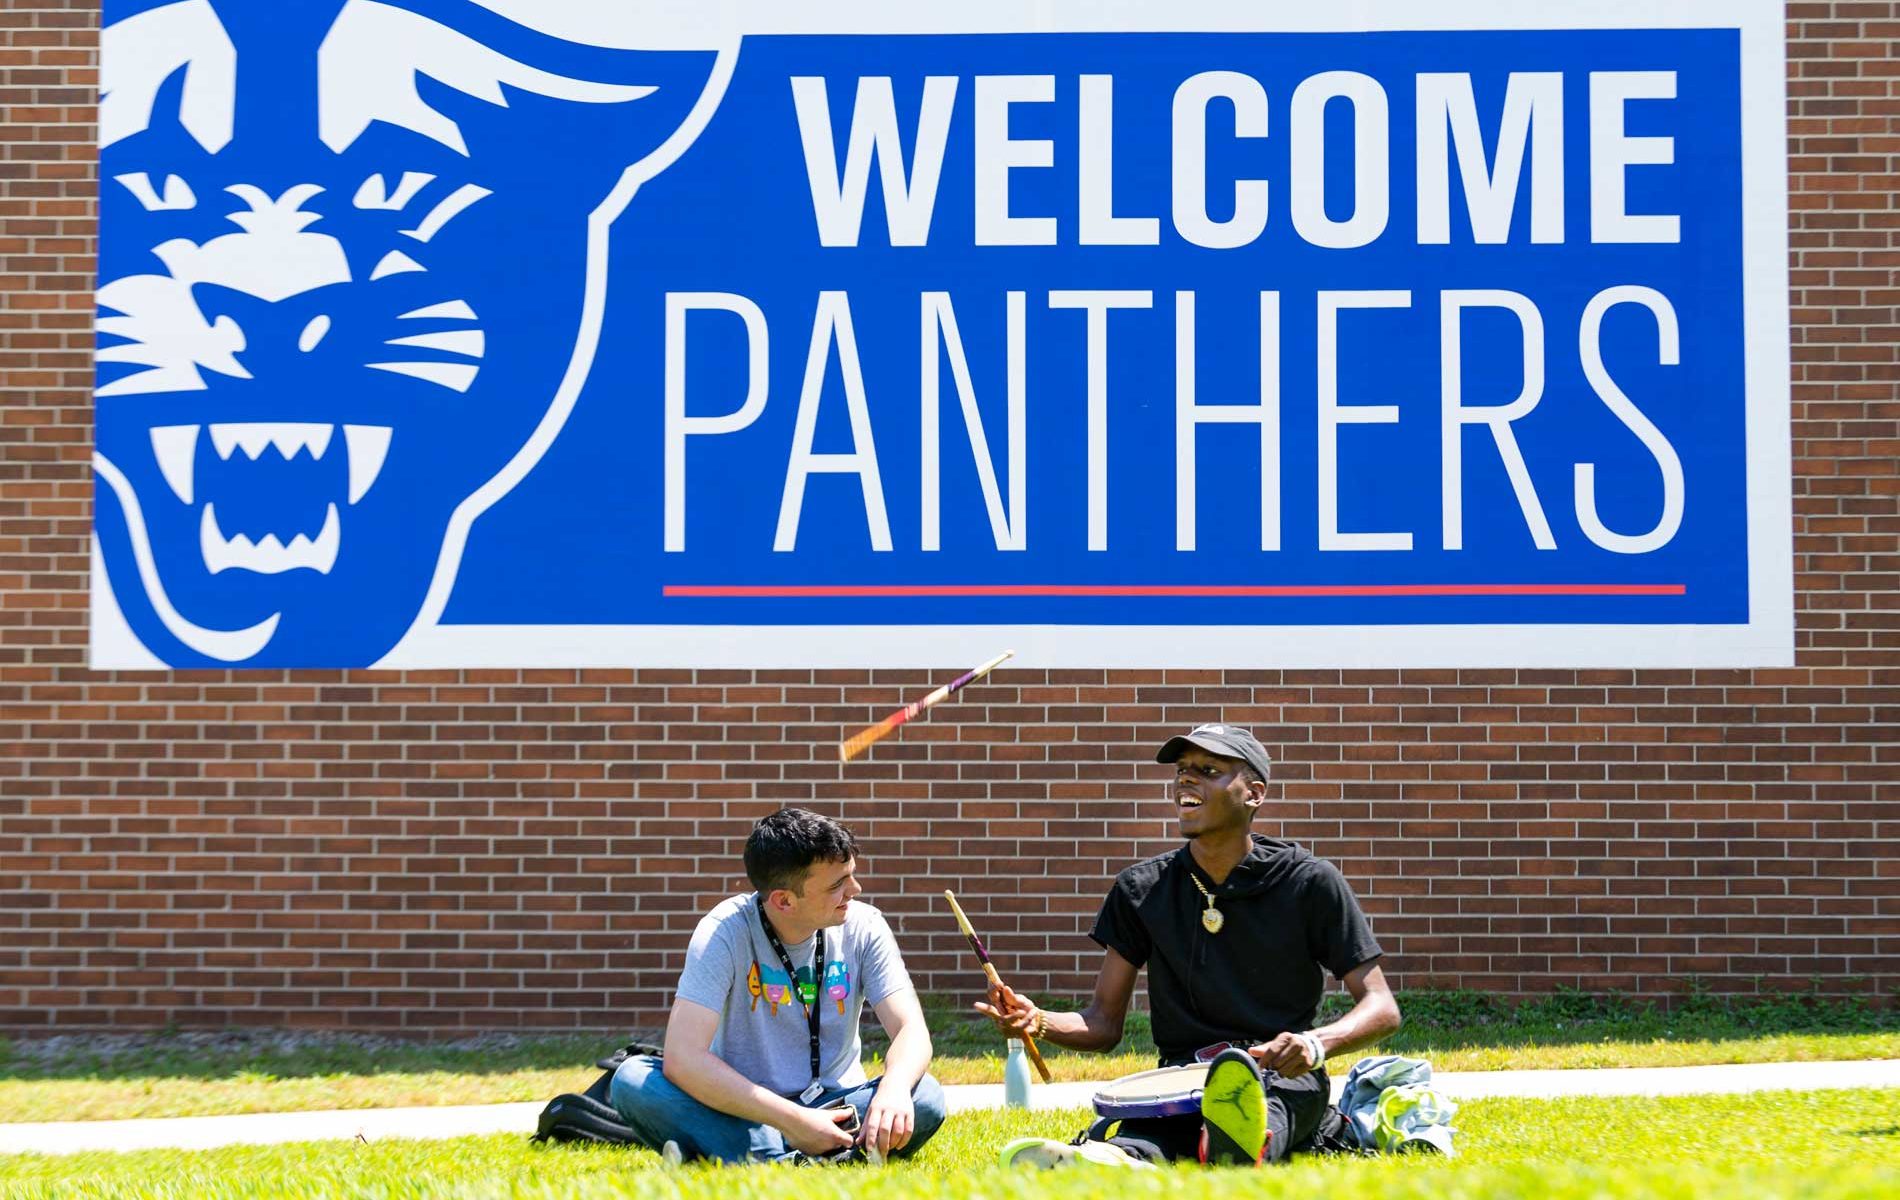 Students conversing on campus in front of the Welcome Panthers sign